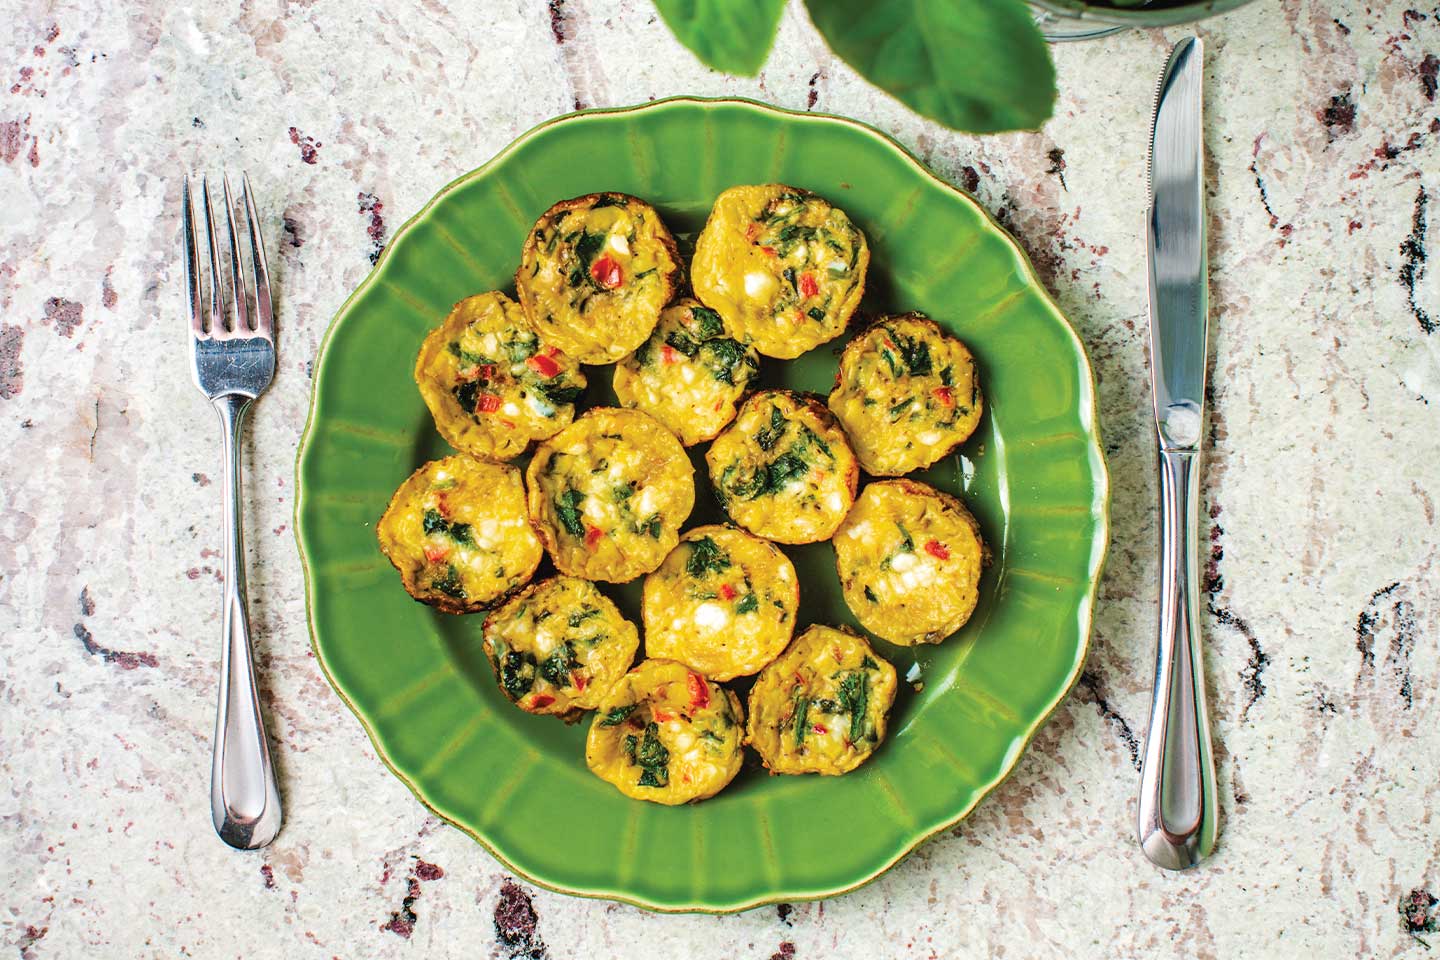 megan hanson's petite spinach frittatas on a green plate by a spinach plant in chattanooga